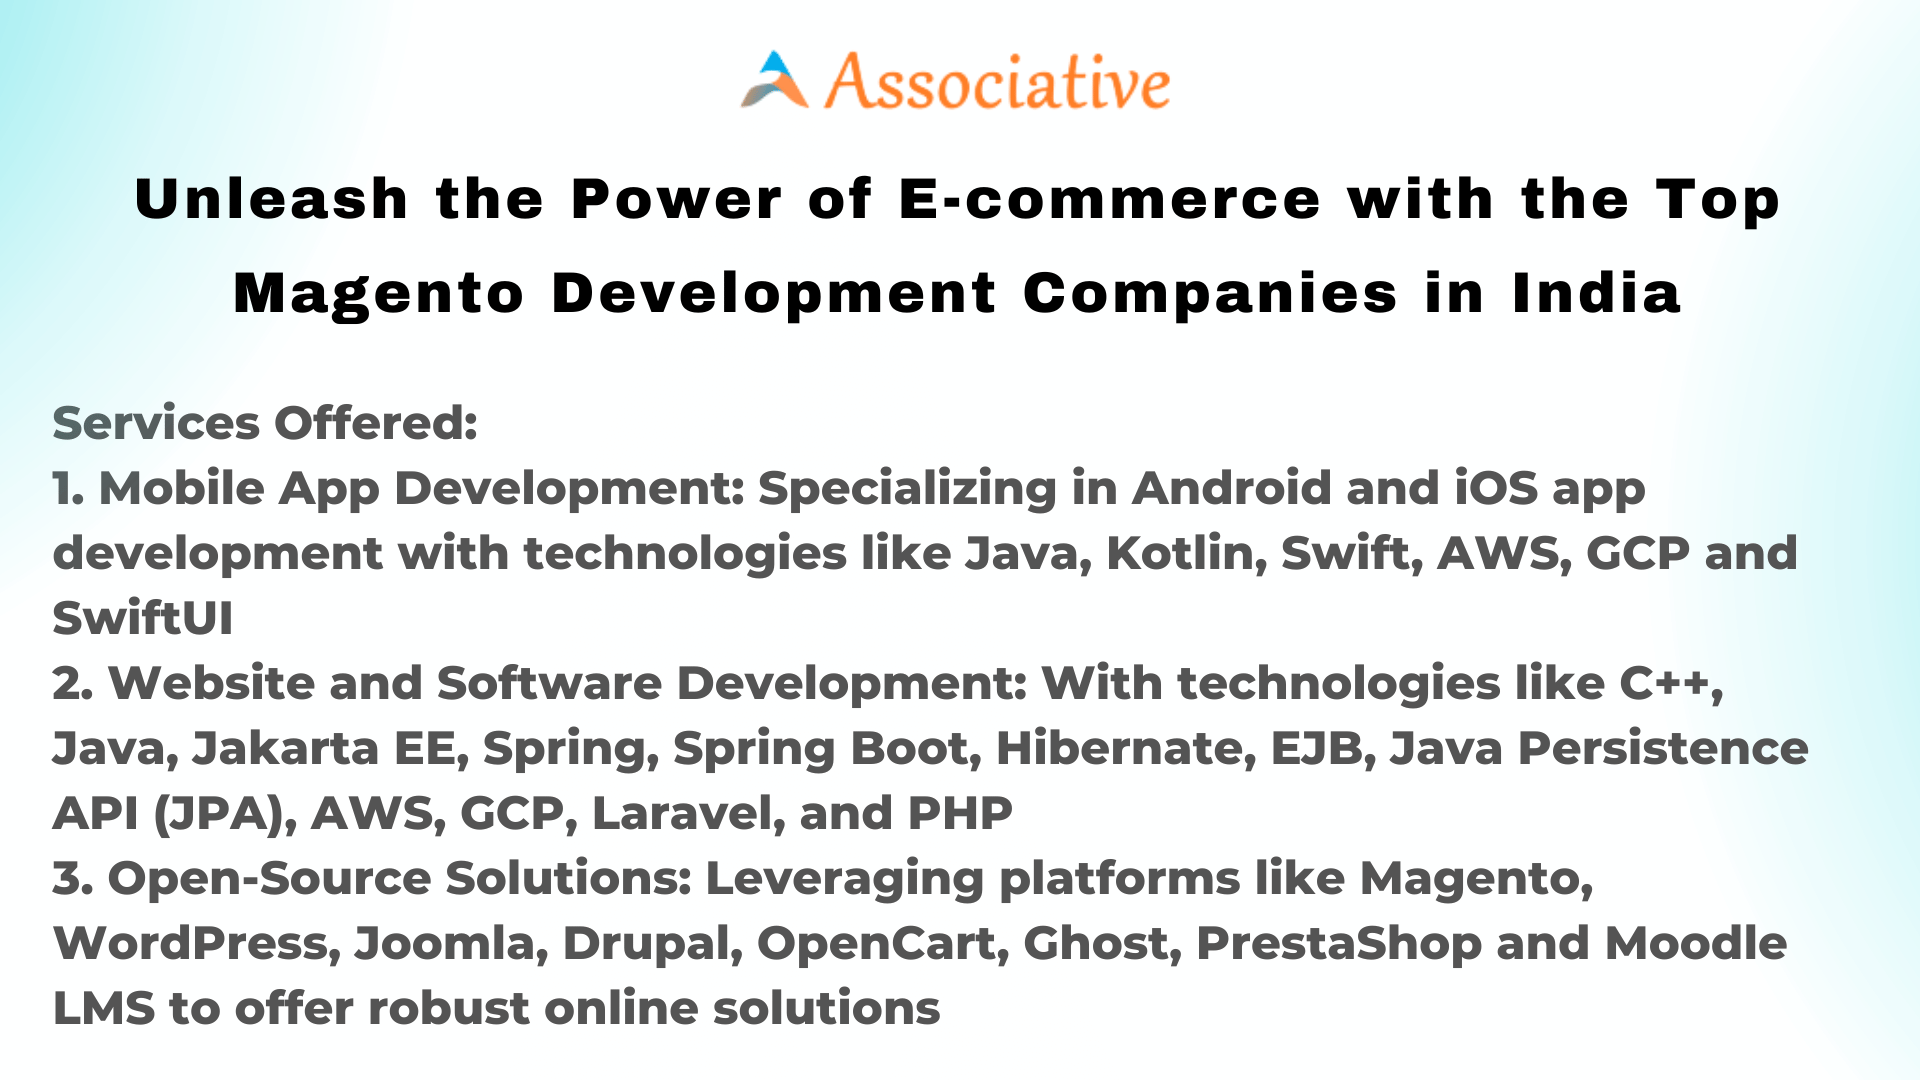 Unleash the Power of E-commerce with the Top Magento Development Companies in India